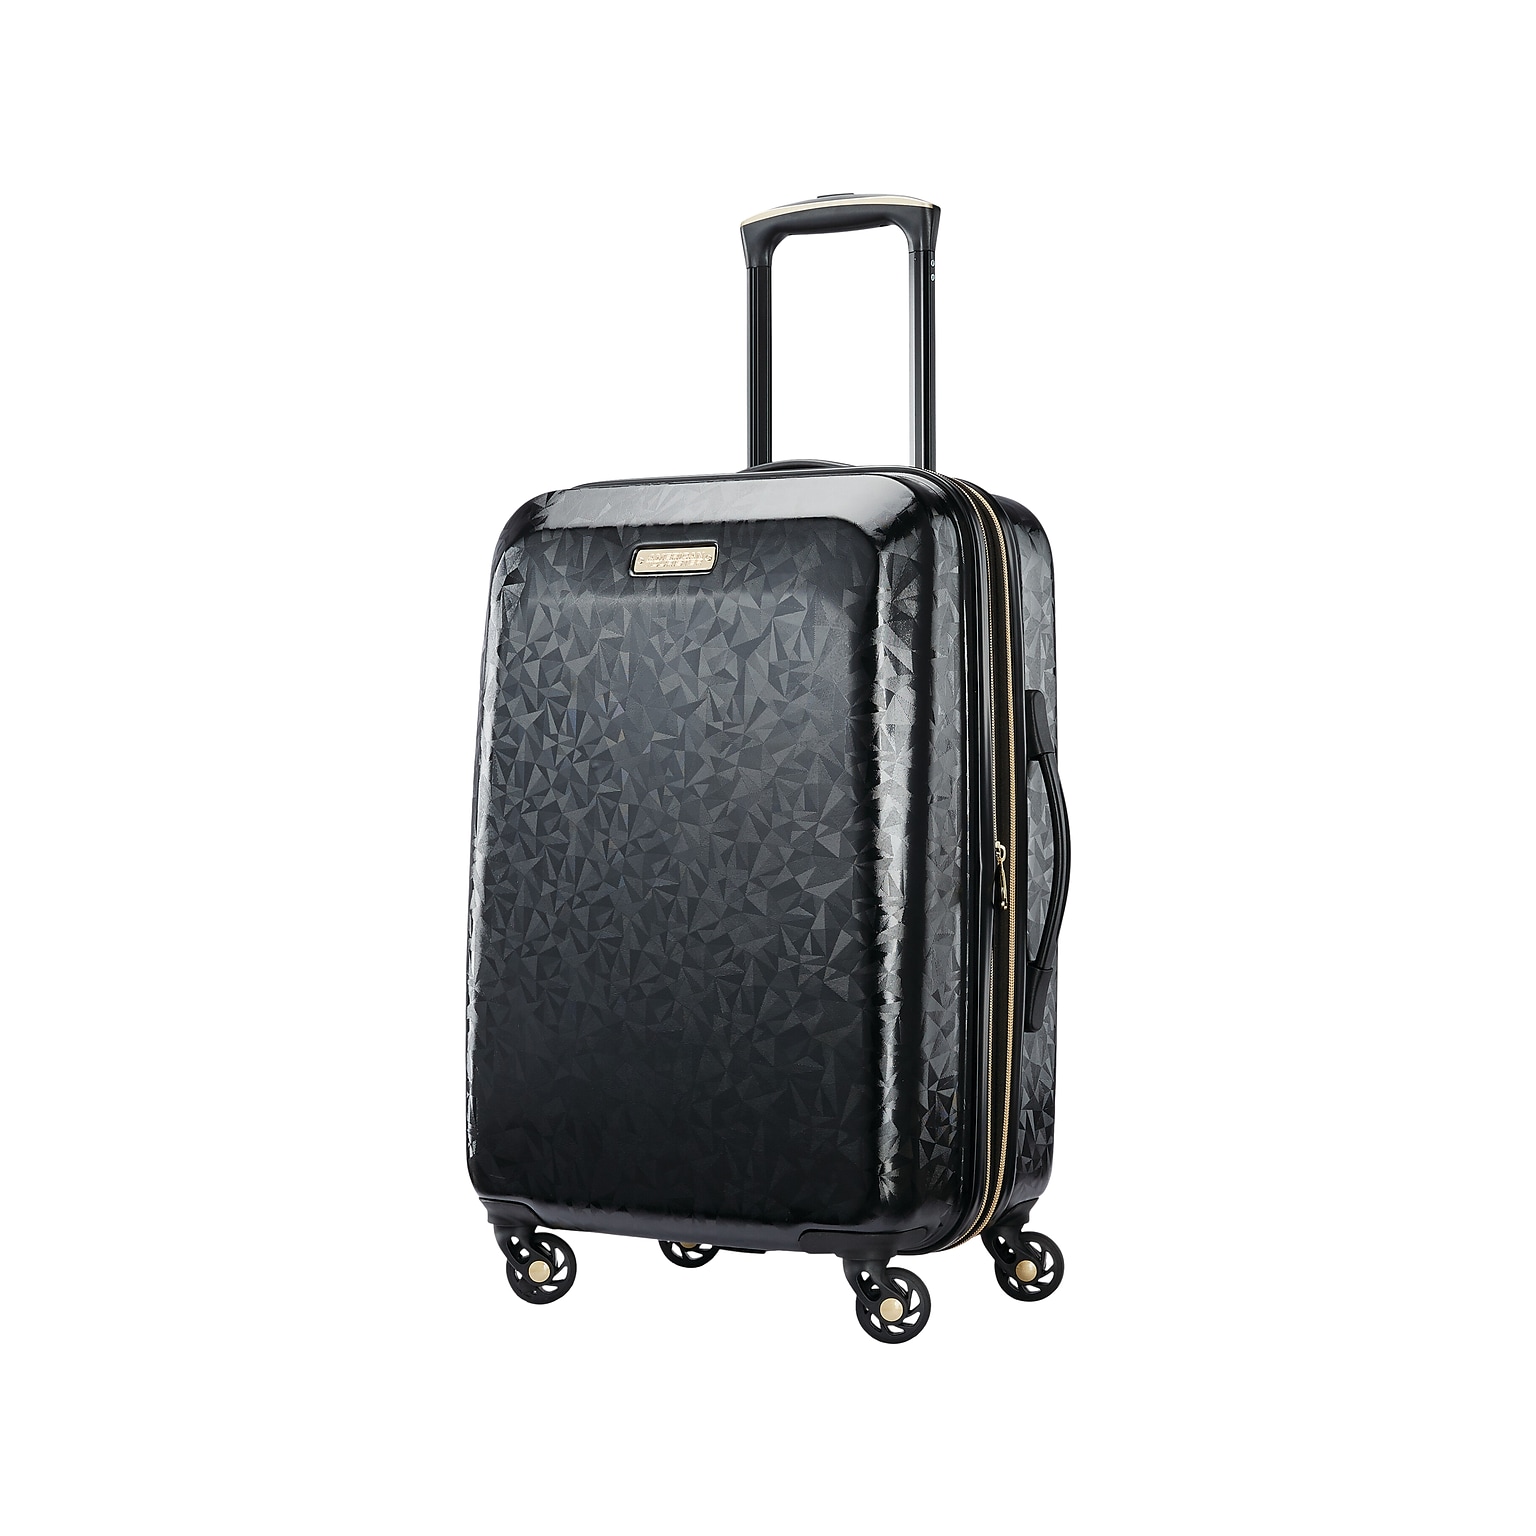 American Tourister Belle Voyage ABS Plastic 4-Wheel Spinner Luggage, Black (127050-1041)